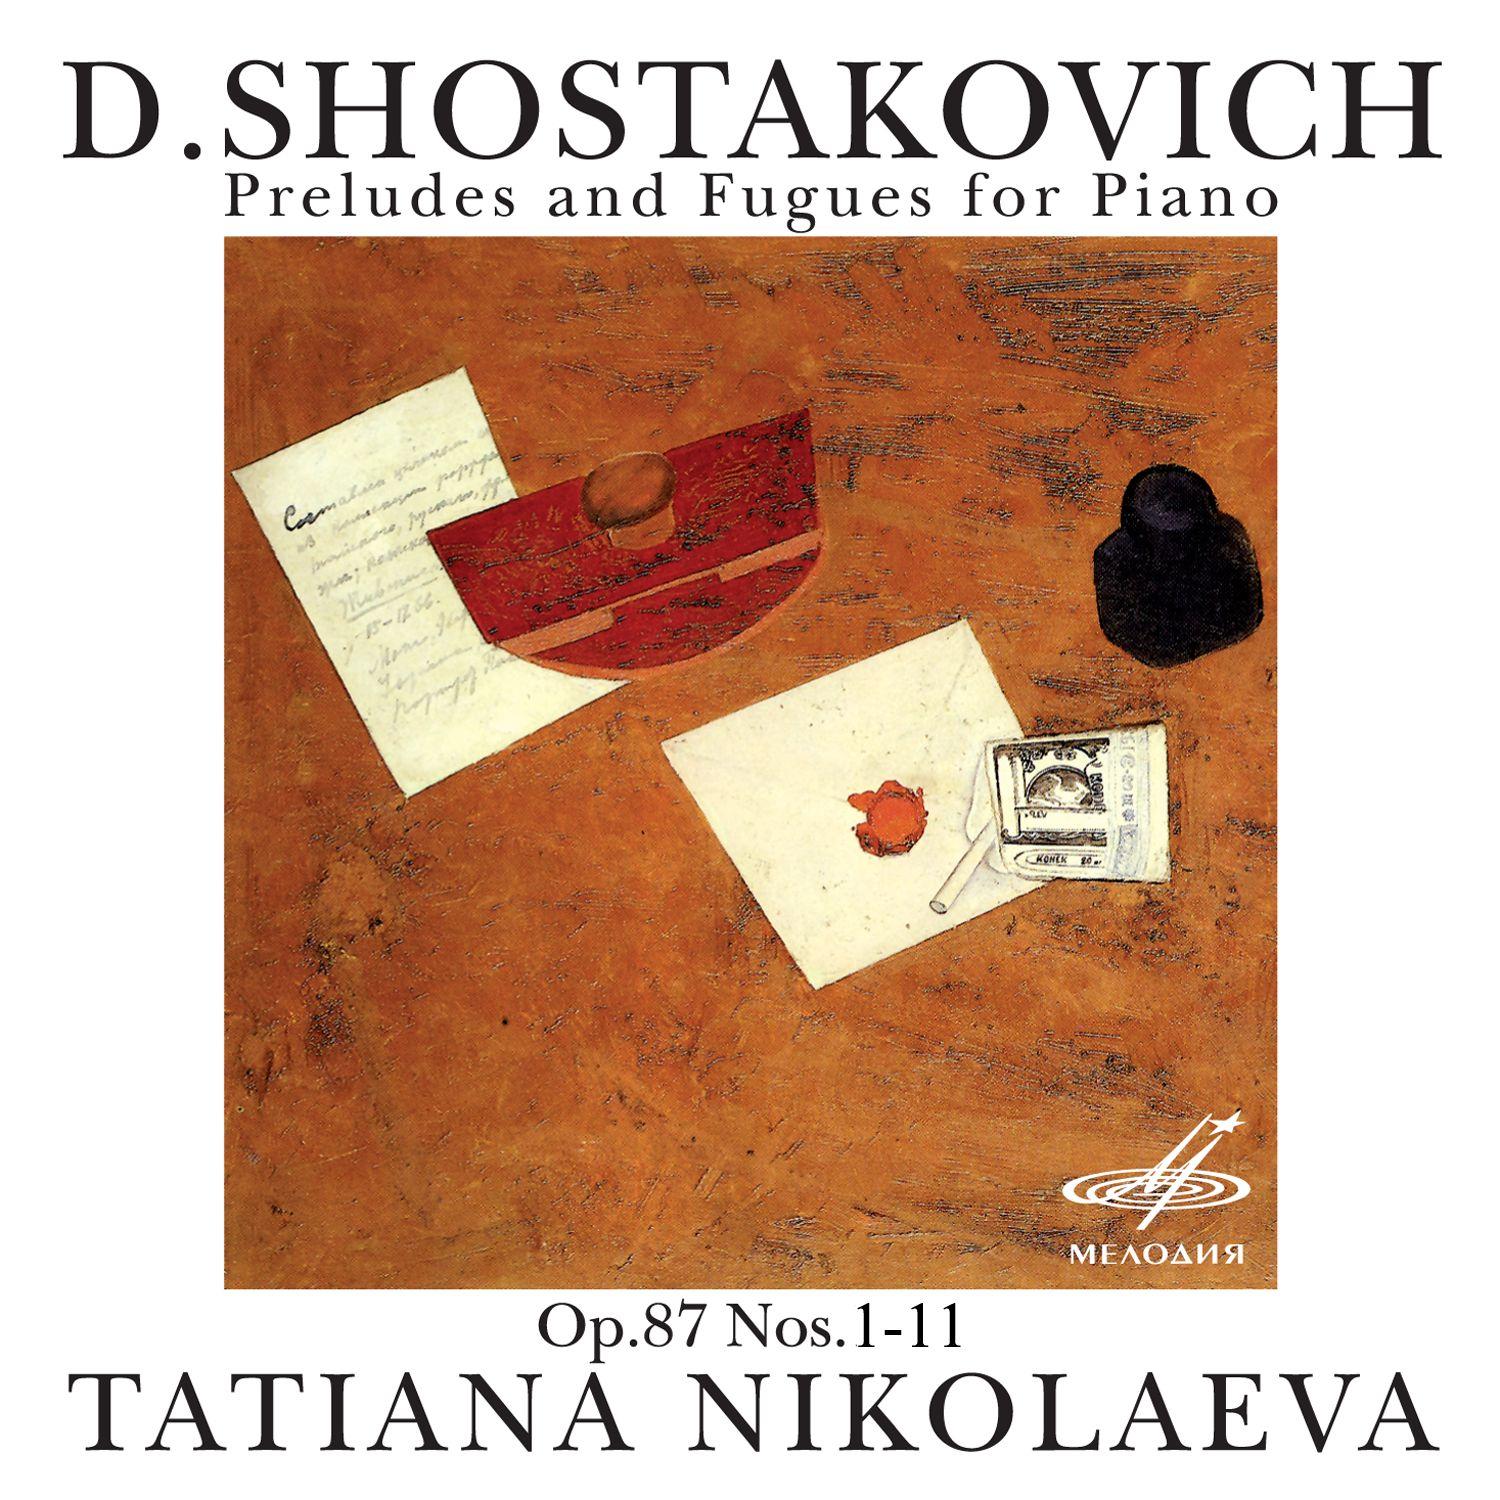 Shostakovich: Preludes and Fugues for Piano, Op. 87, Nos. 1-10